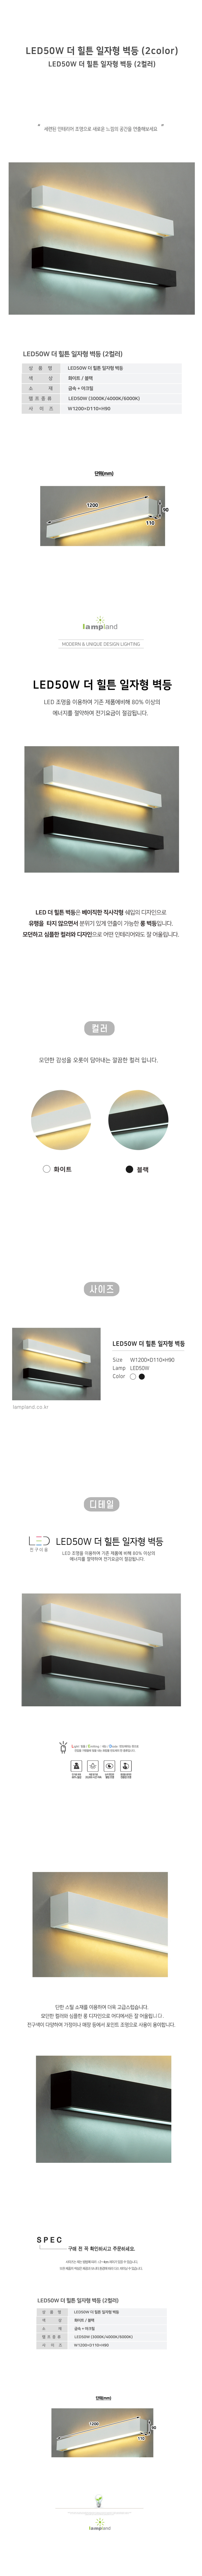 [LED50W] 더 힐튼 일자형 벽등(2color)